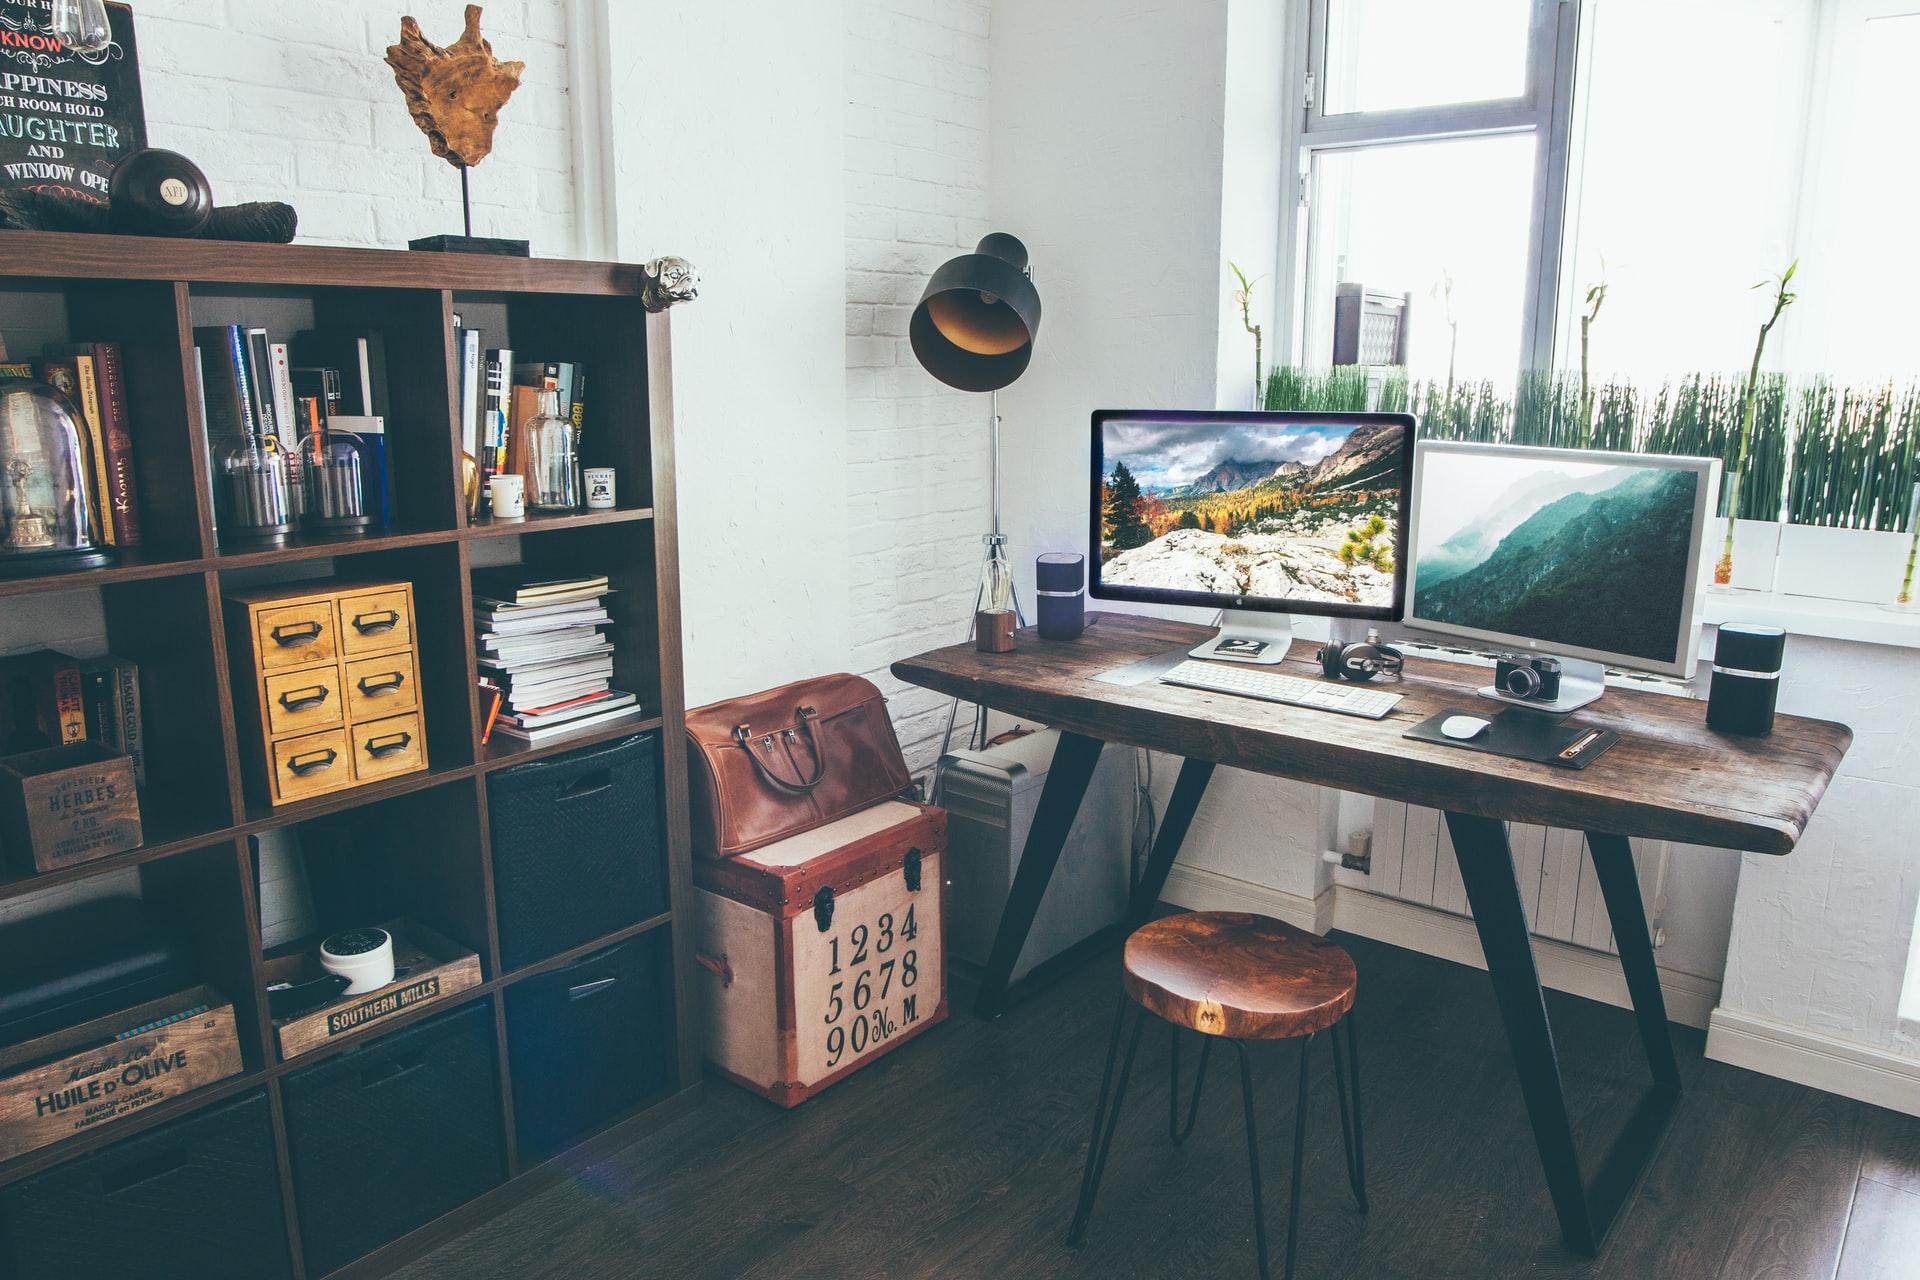 setting up your work from home office